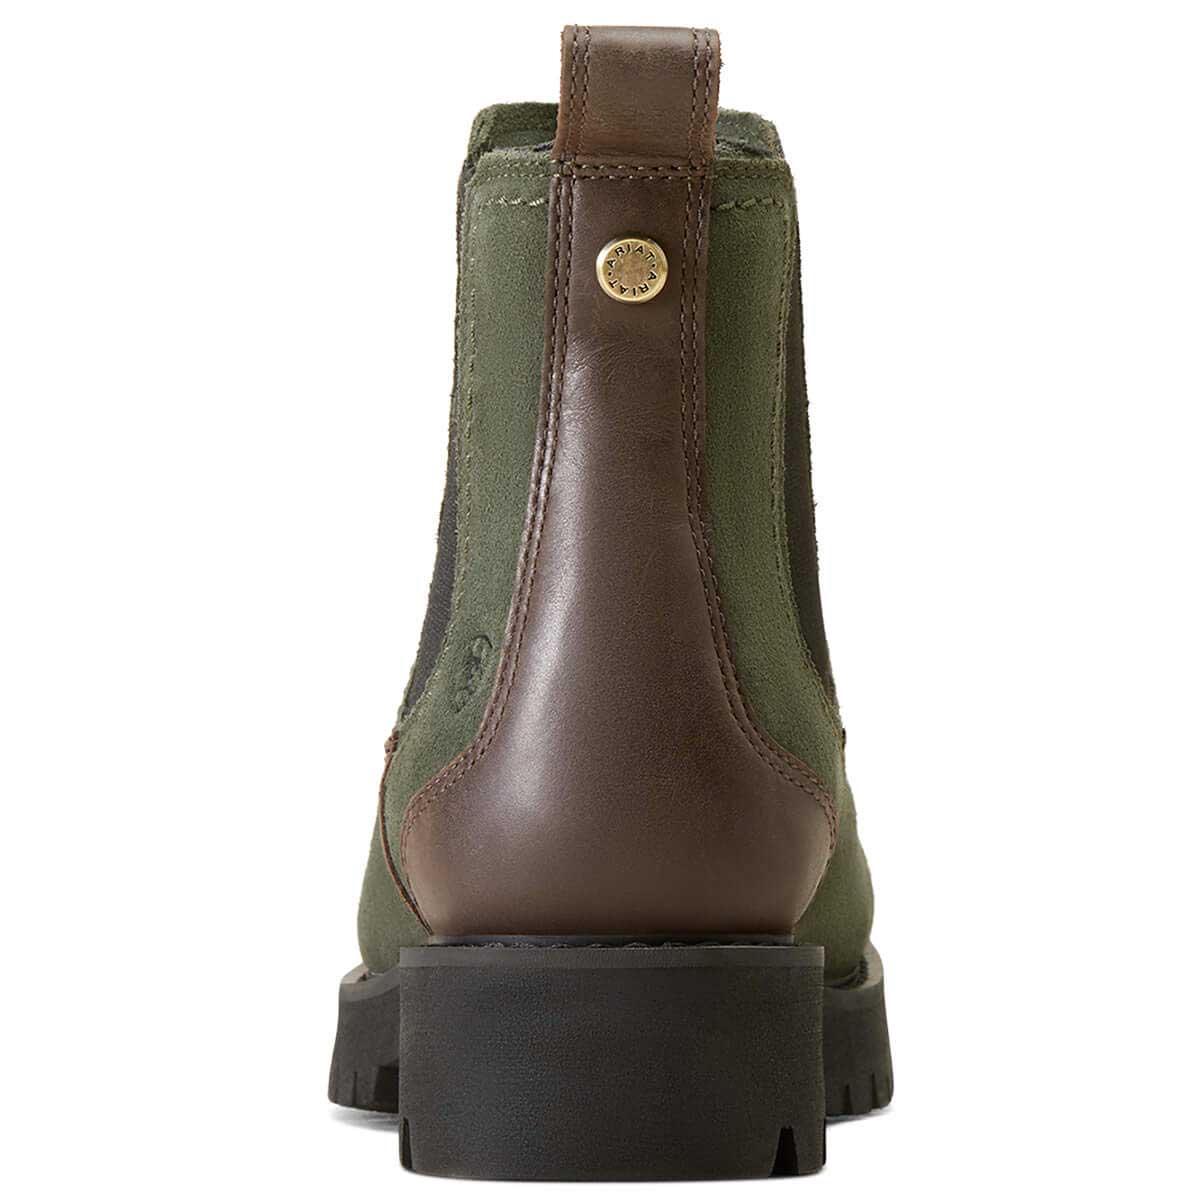 ARIAT Wexford Lug H2O Waterproof Chelsea Boots - Womens - Forest Night